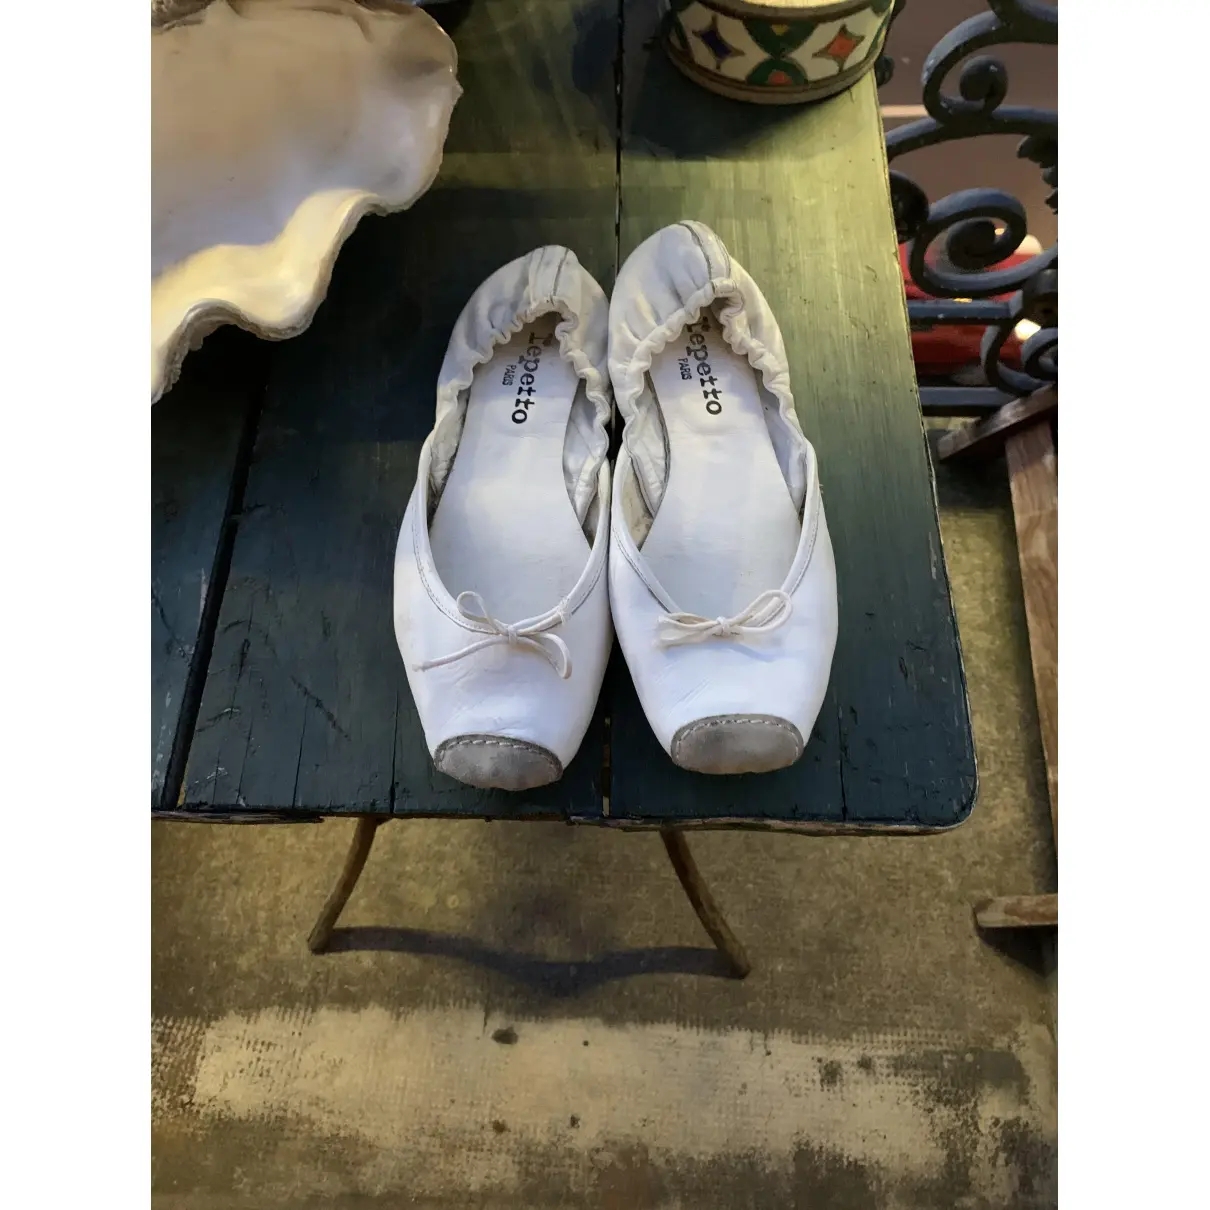 Buy Repetto Leather ballet flats online